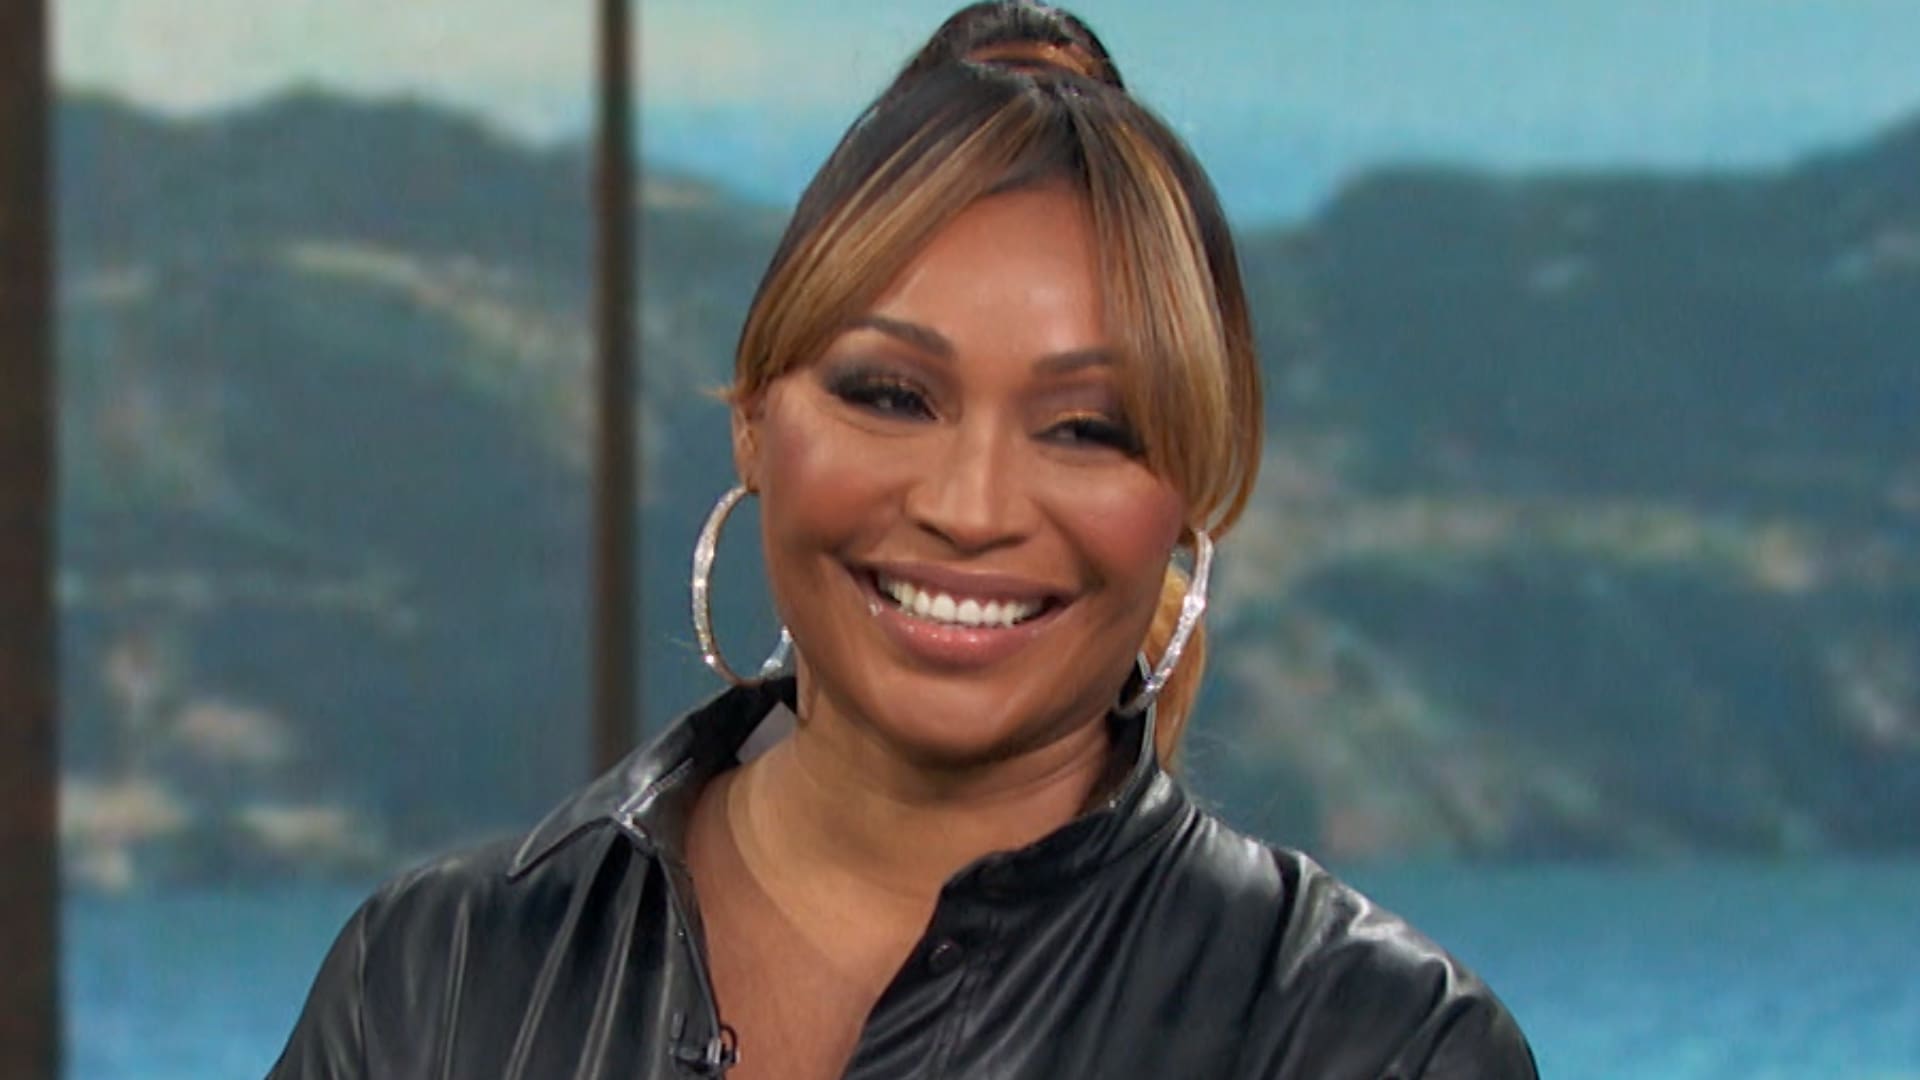 Cynthia Bailey Shows Off An Amazing New Look, Leaving Fans Mesmerized